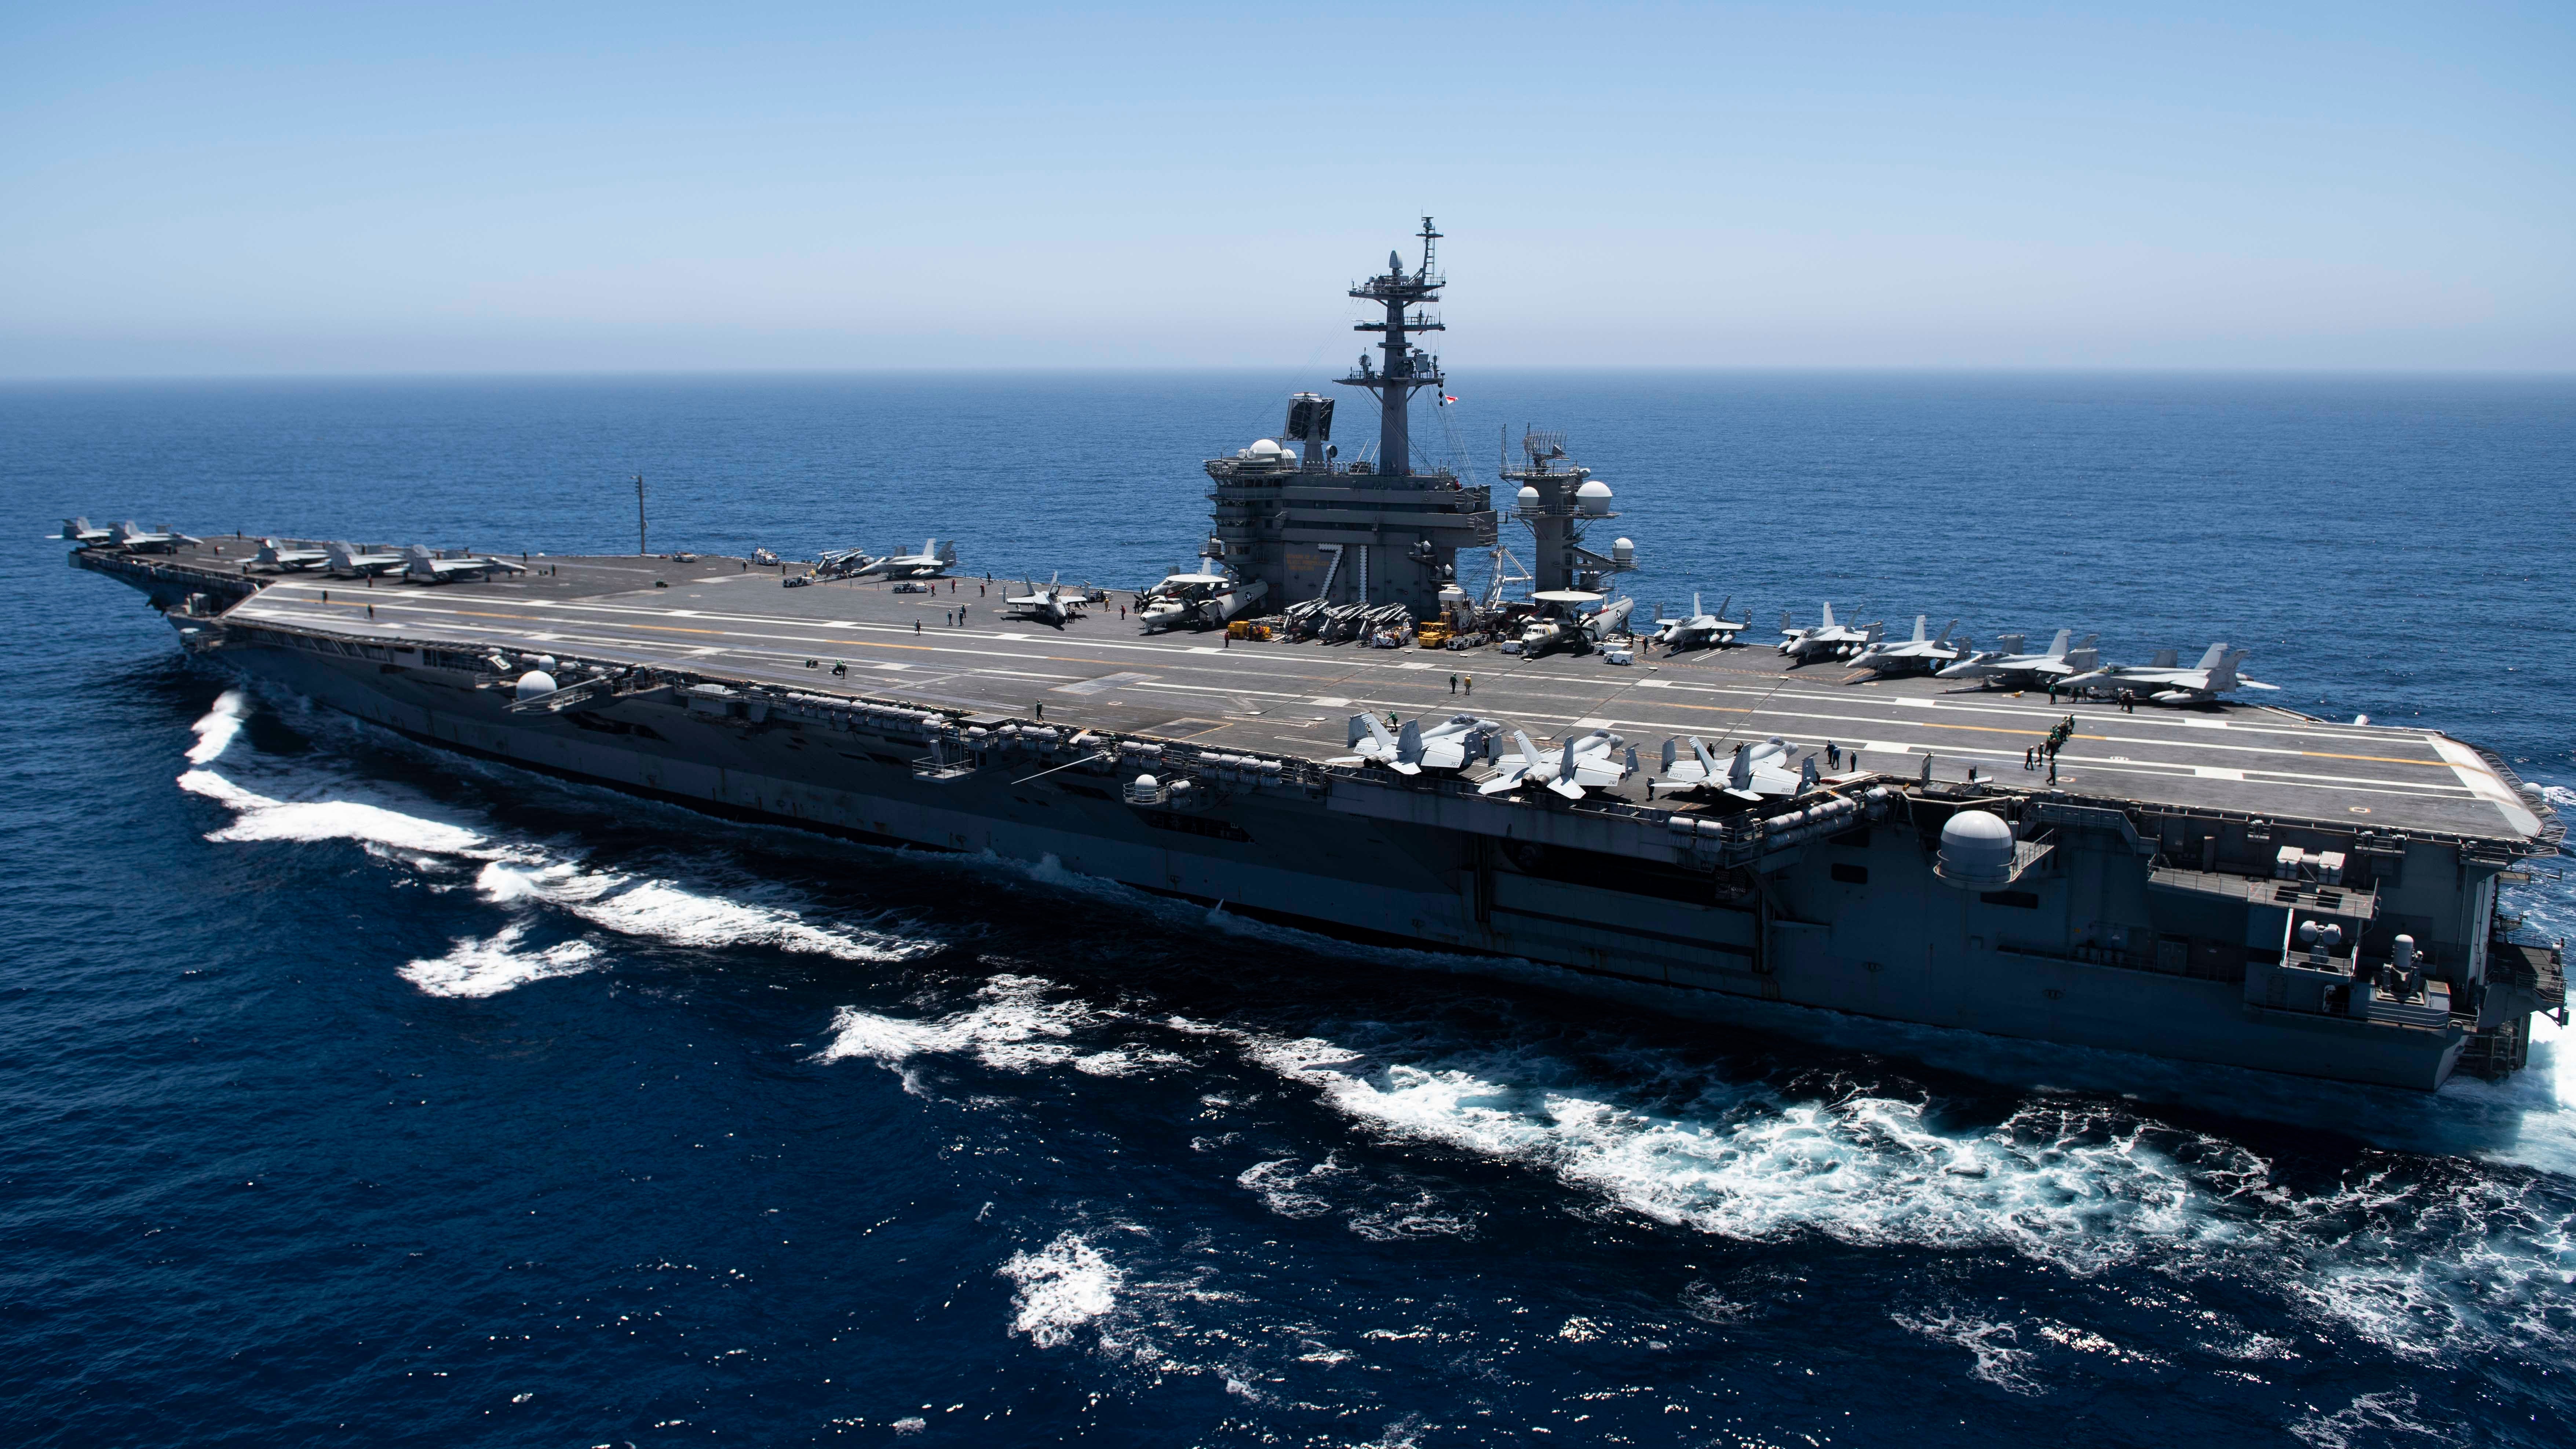 <p>In this handout released by the U.S. Navy, The aircraft carrier USS Theodore Roosevelt (CVN 71) transits the Pacific Ocean. Theodore Roosevelt is conducting routine operations in the Eastern Pacific Ocean</p>